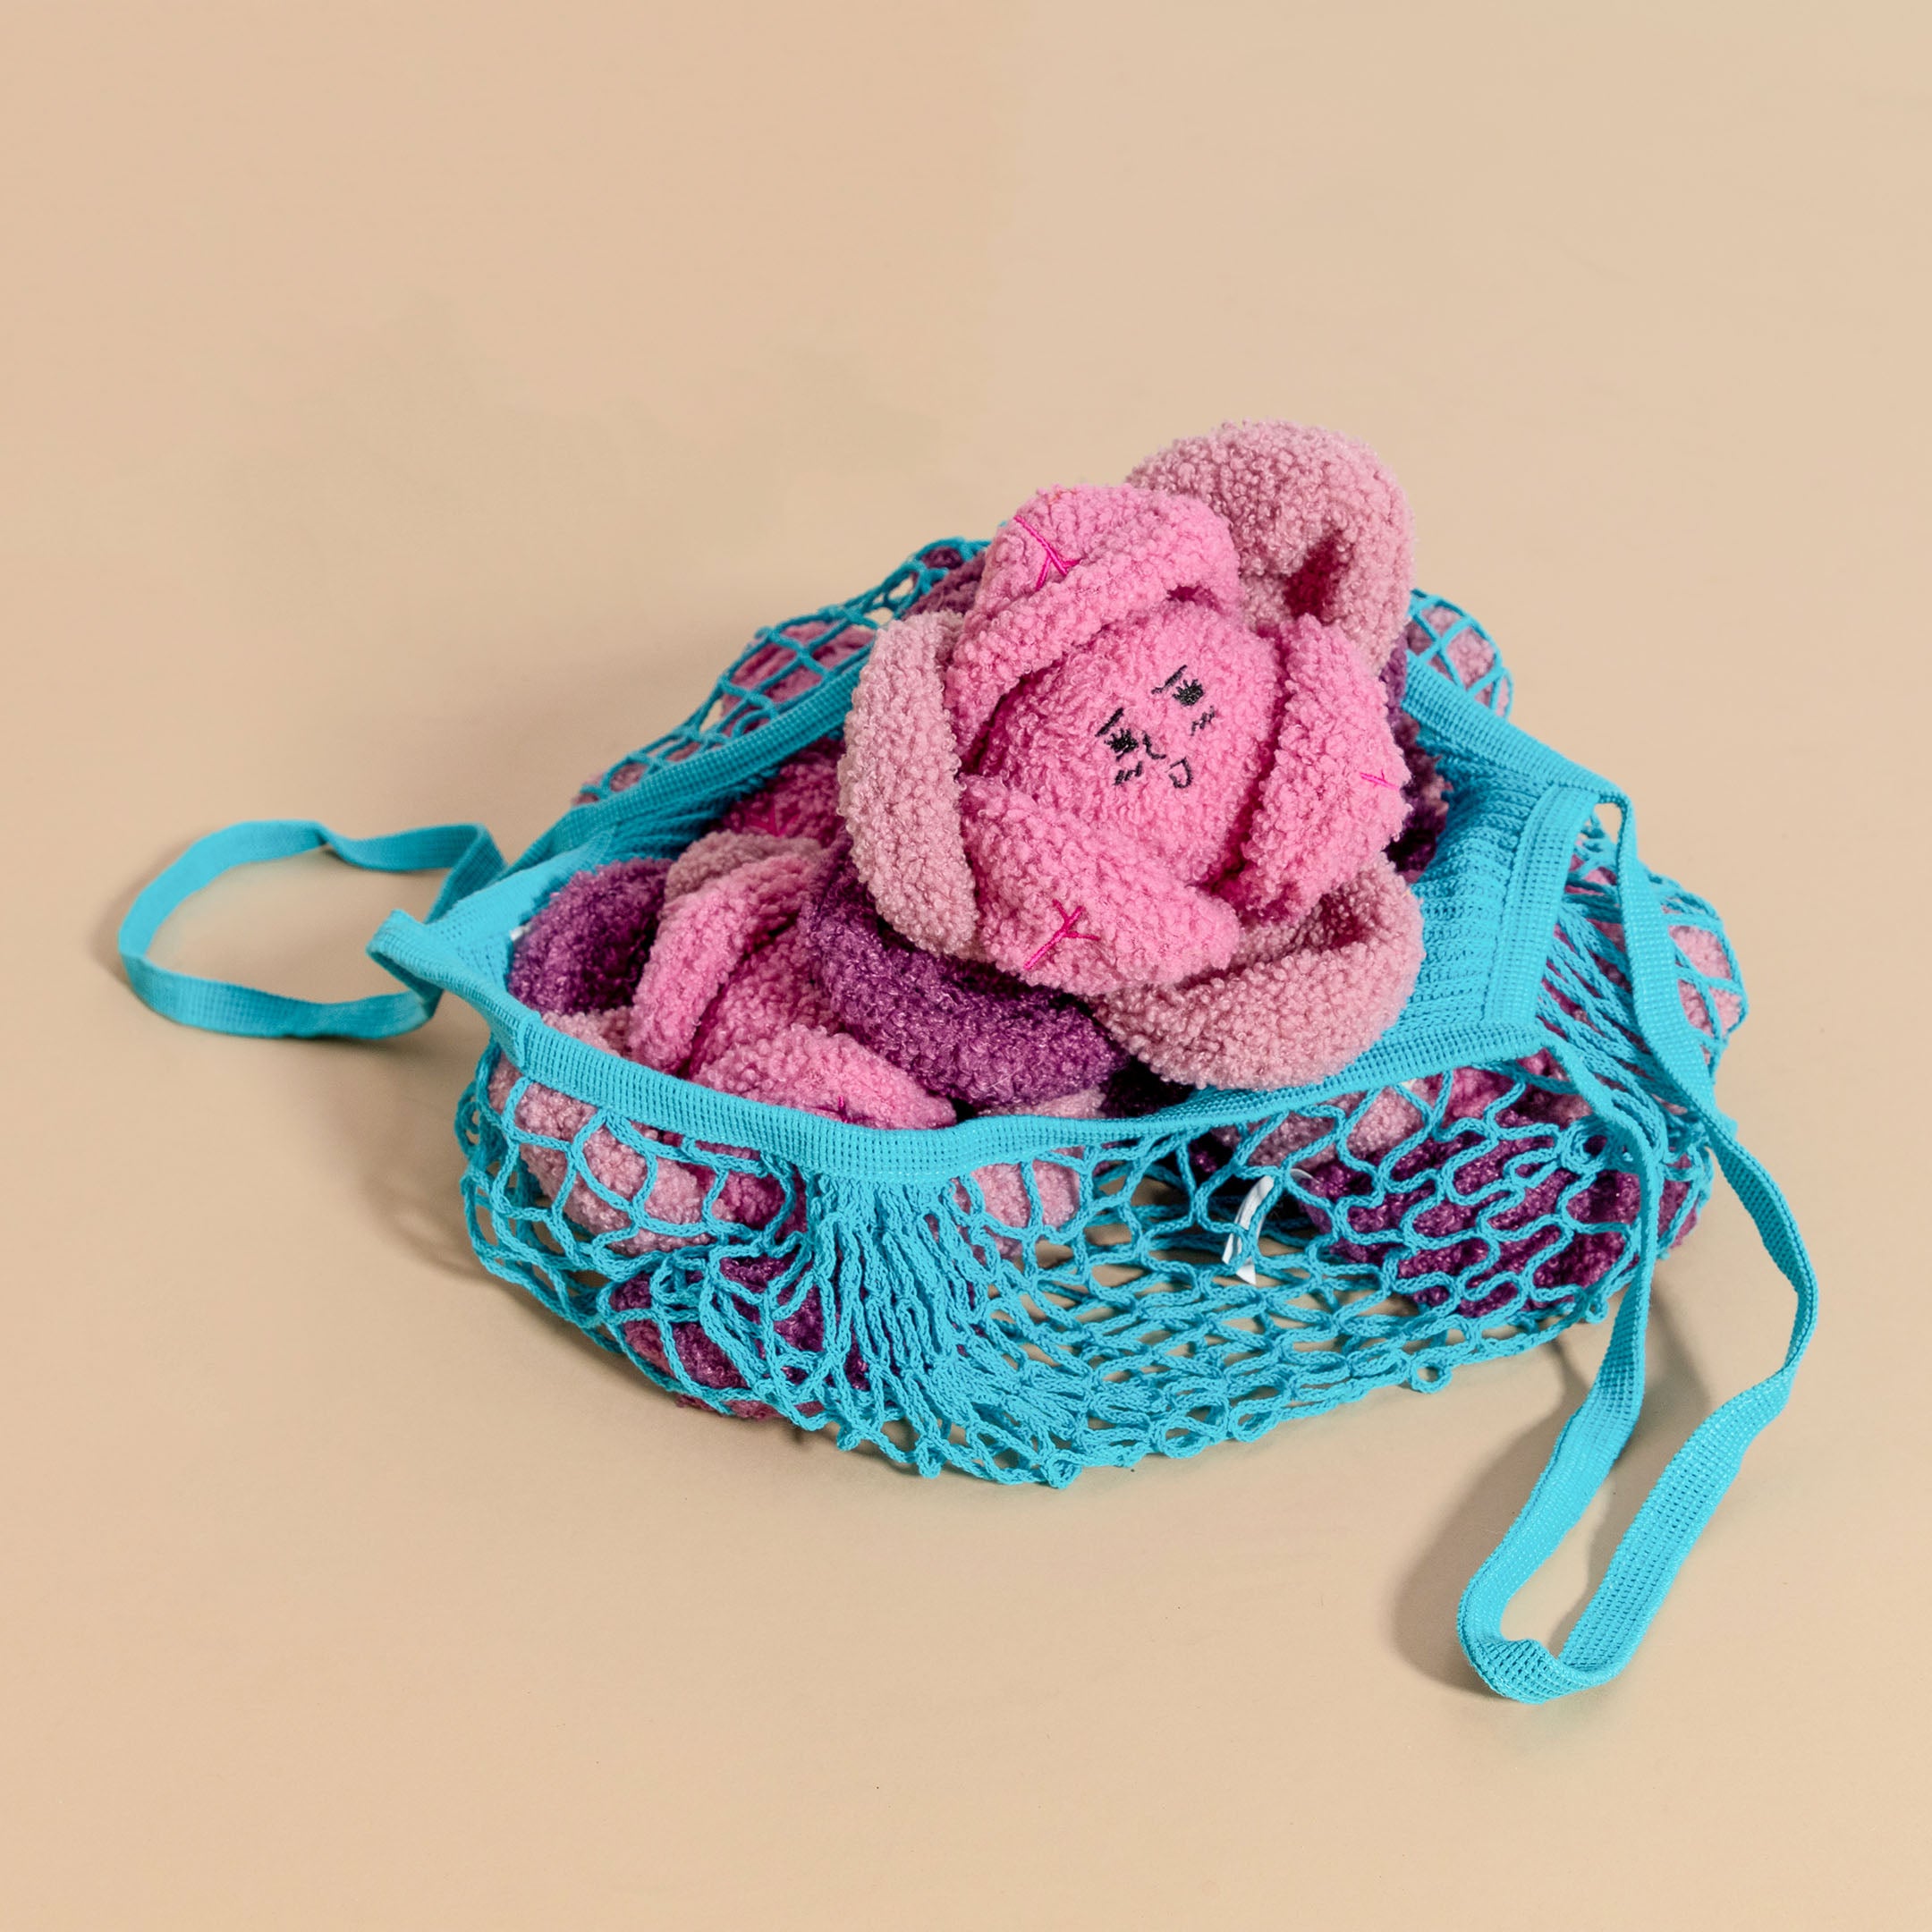 The image features a turquoise net bag containing plush Red Cabbage shaped dog toys in pink and purple. The toys have a cozy and textured appearance, with a sleepy face embroidered on the front, designed for pet engagement and play. The contrast of the bright net bag against the beige background emphasizes the playful nature of the toys, hinting at a fun and interactive experience for pets. The net bag adds a practical touch for storage and transport of the toys.